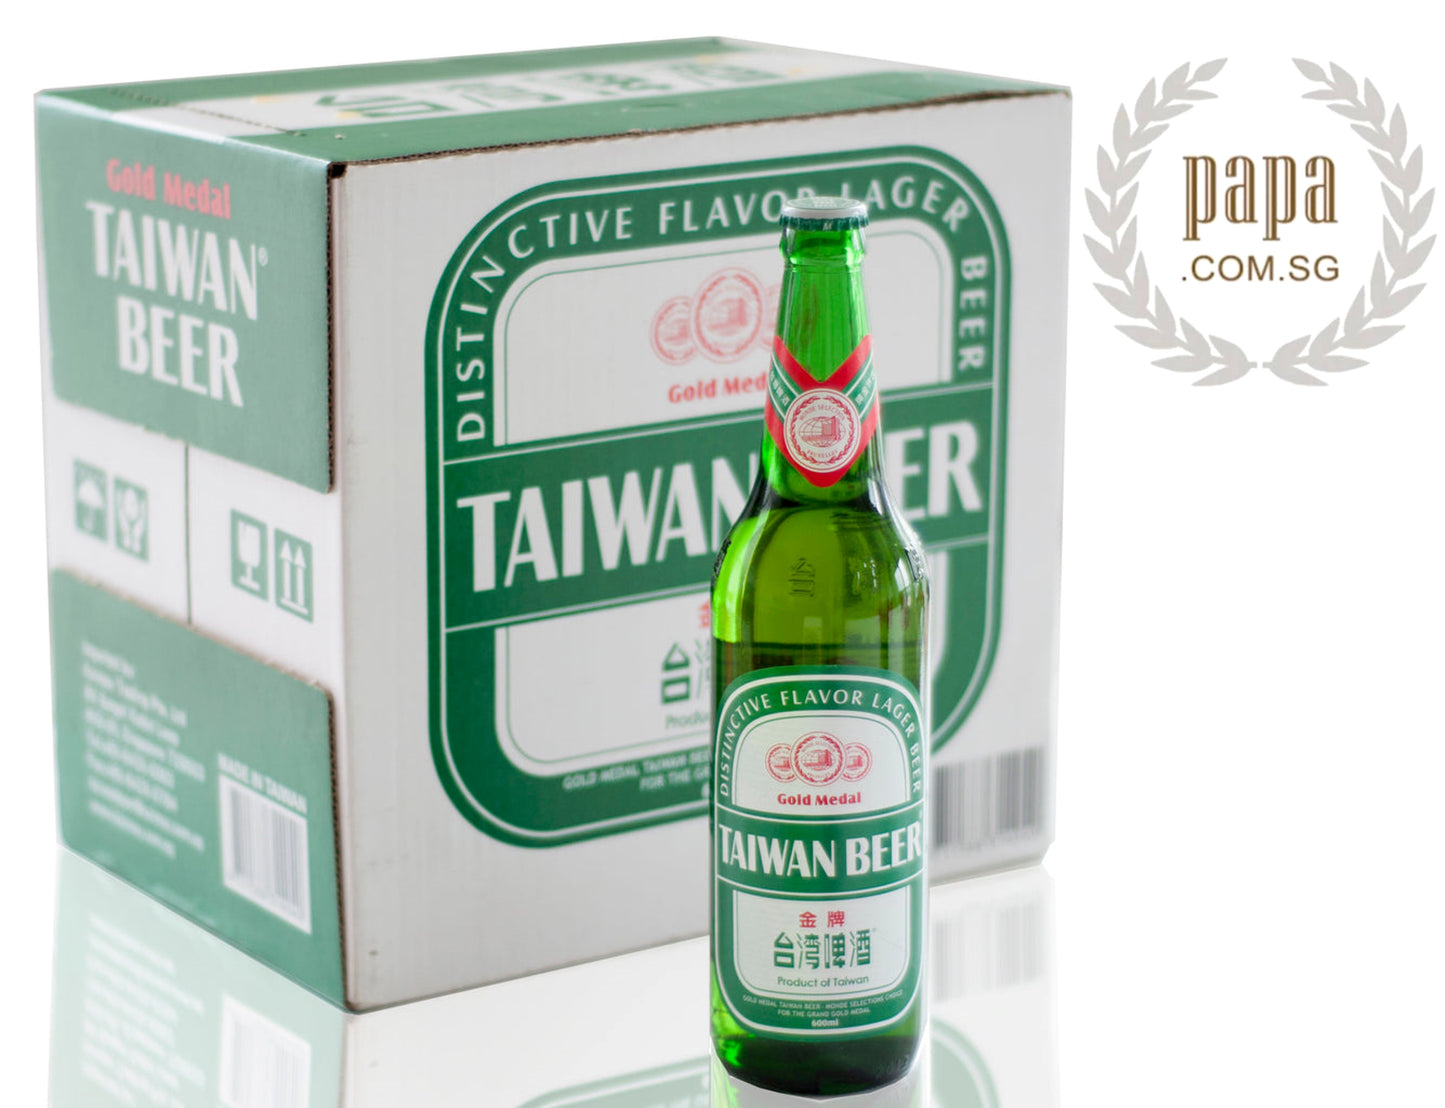 Taiwan Gold Medal Premium Lager - Brewed With Taiwan's Own Local Ponlai Rice